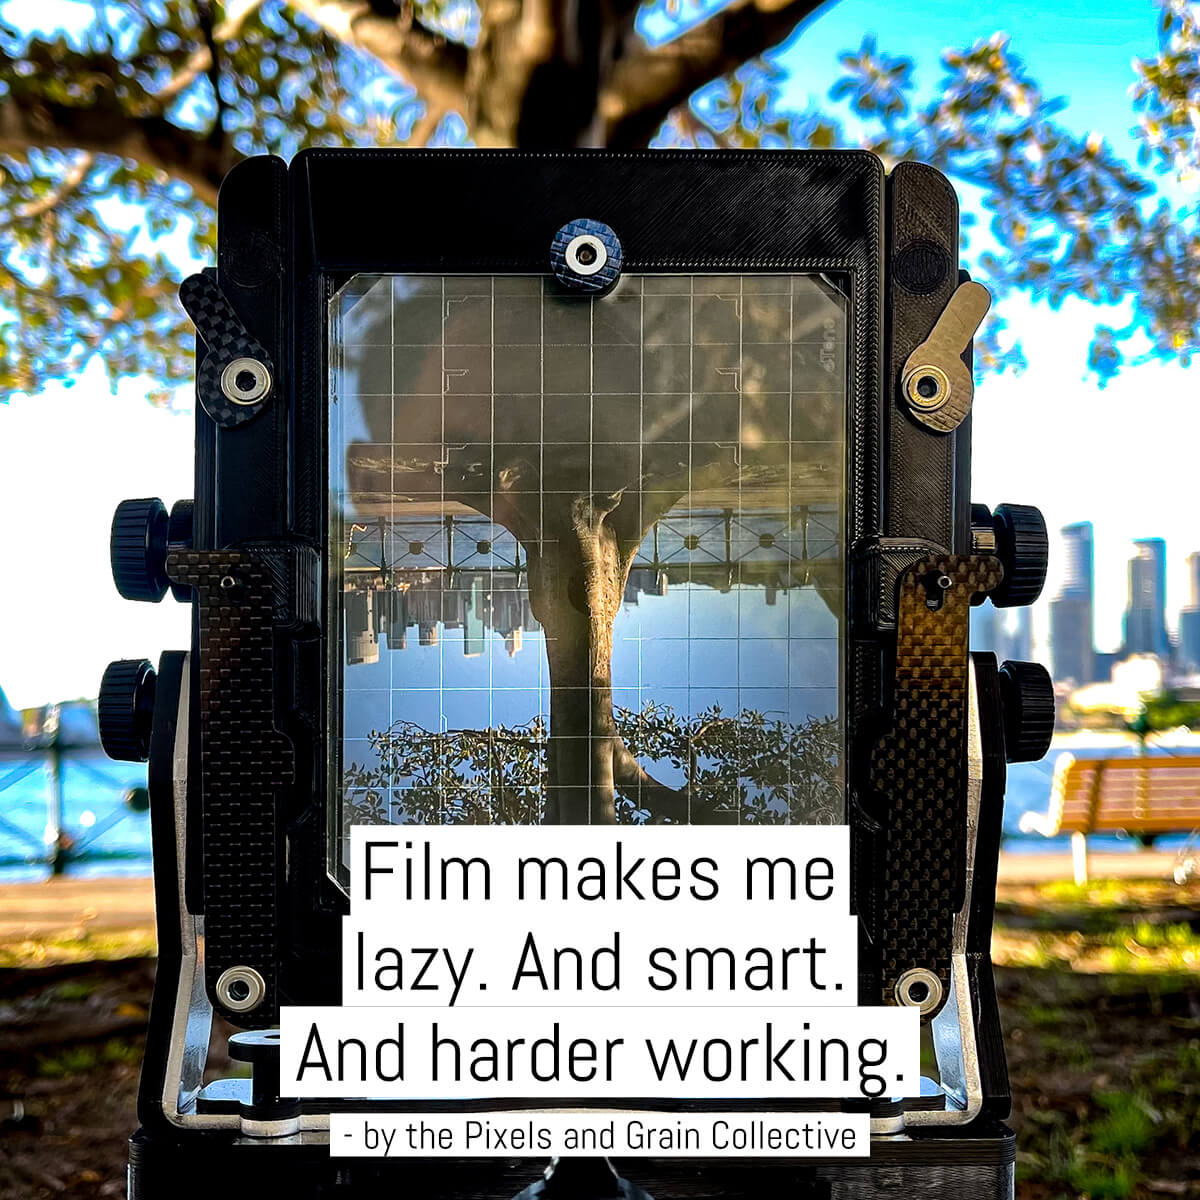 Film makes me lazy. And smart. And harder working.